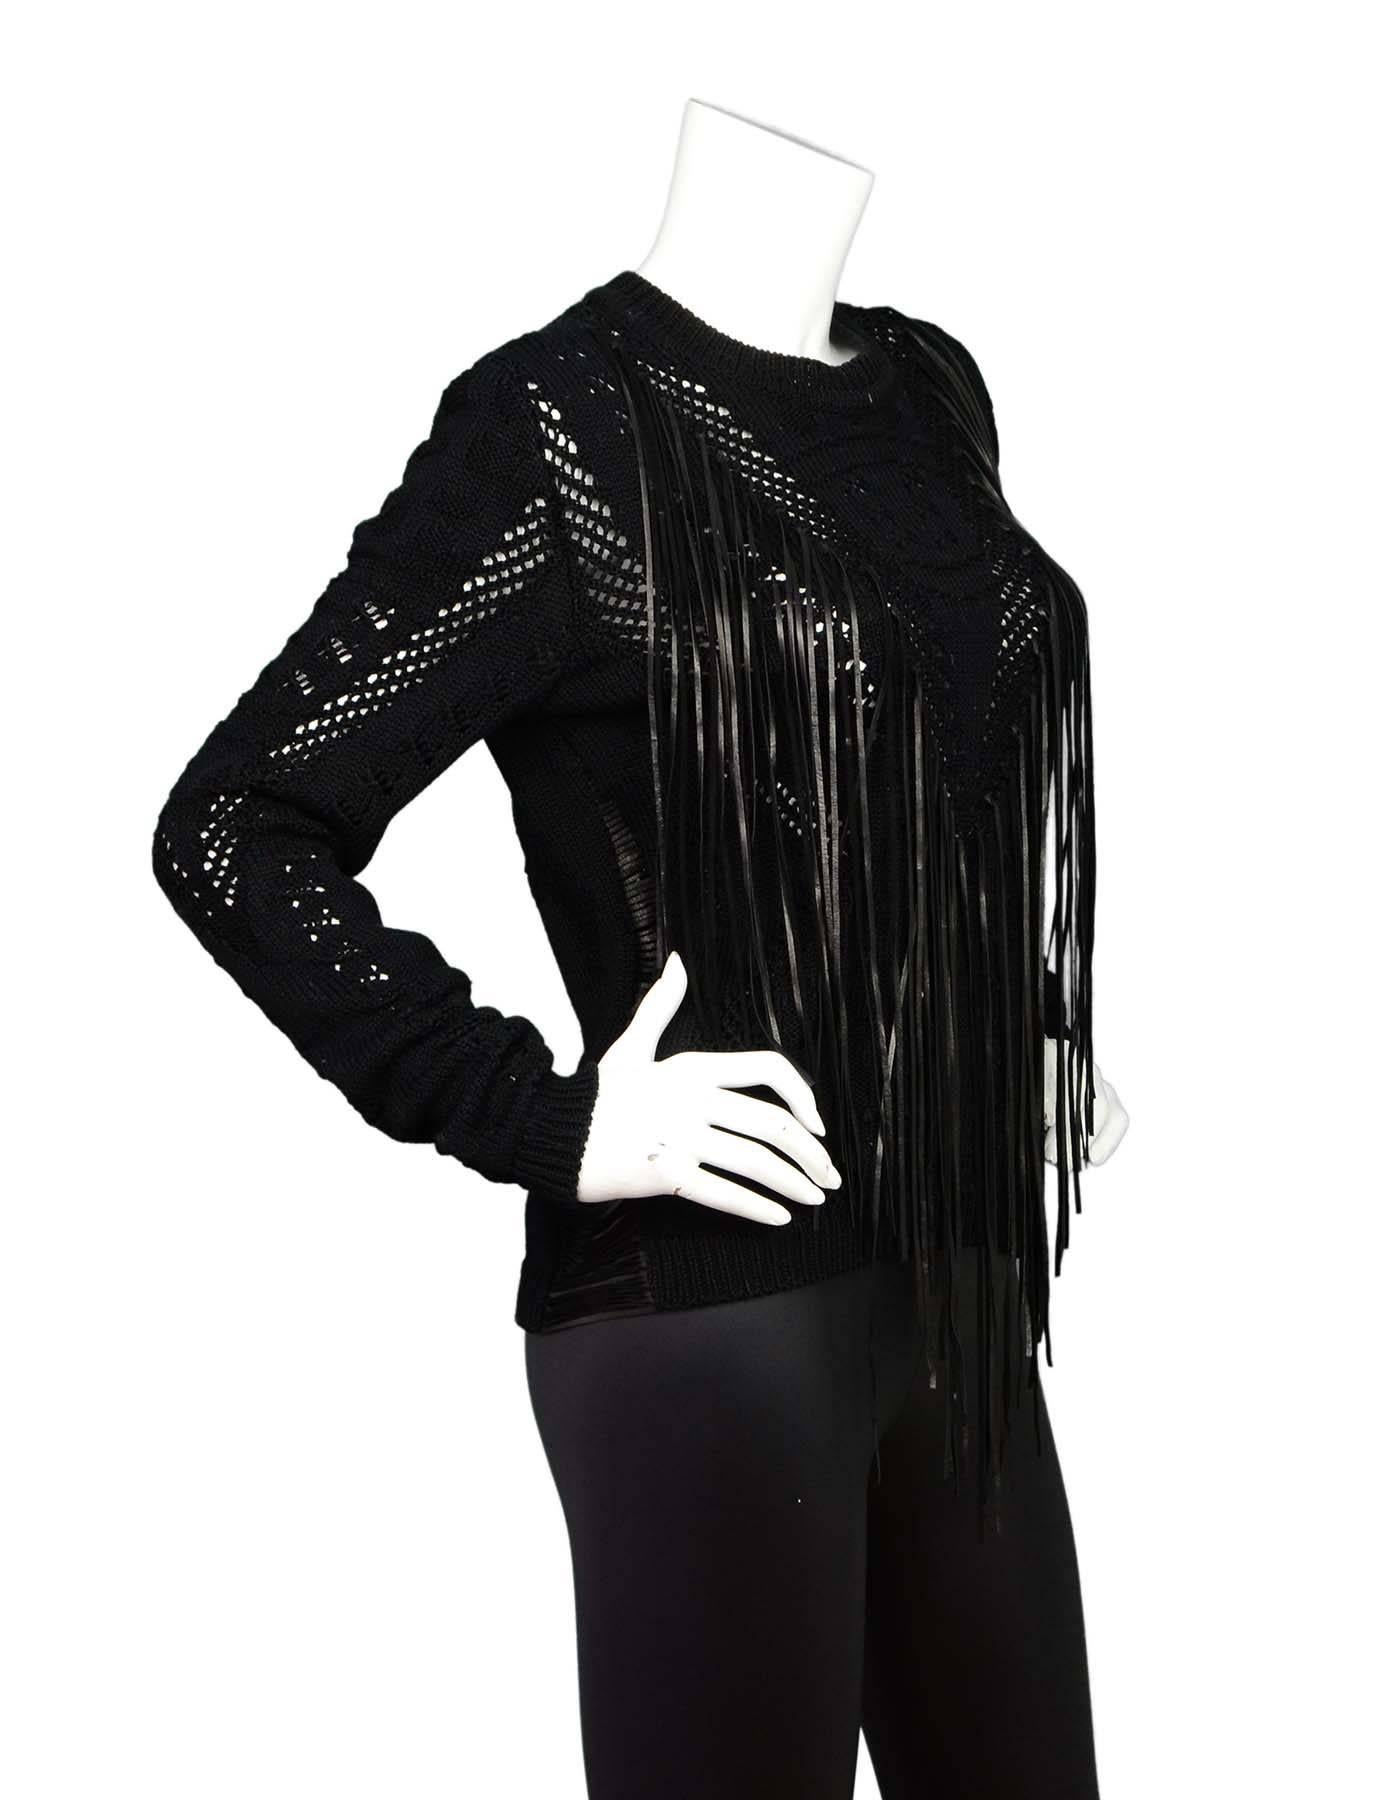 Roberto Cavalli Black Knit Sweater Sz 40
Features leather fringe at front

Made in: Italy
Color: Black
Composition: 84% cotton, 16% rayon
Lining: None
Retail Price: $1,300 + tax
Closure/Opening: Pull over
Overall Condition: Excellent